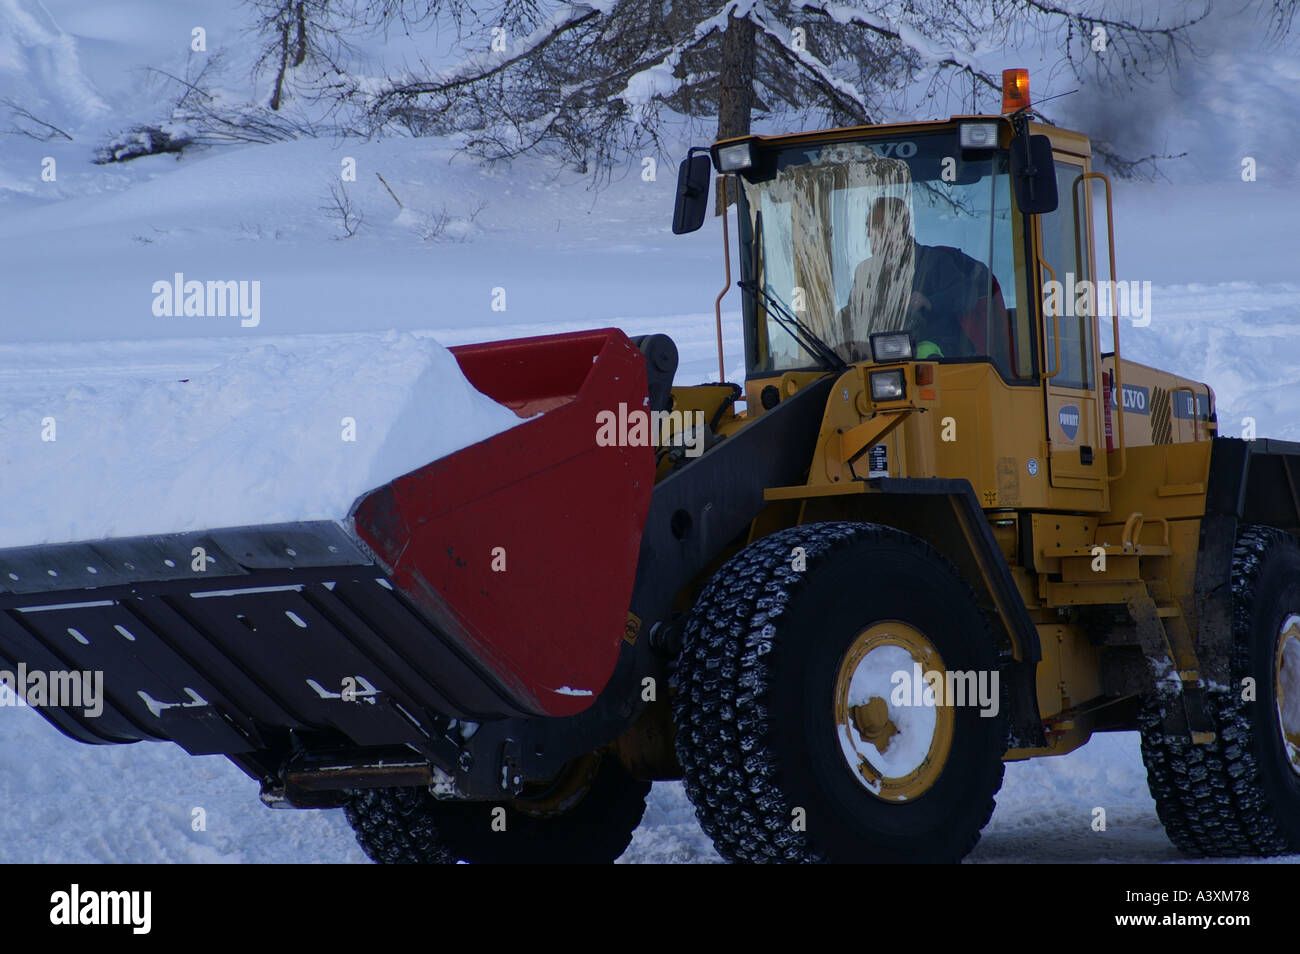 On the Volvo snow clearing in Val D'Isere Jan 2005 neige poudre Tarentaise Savoie France Stock Photo